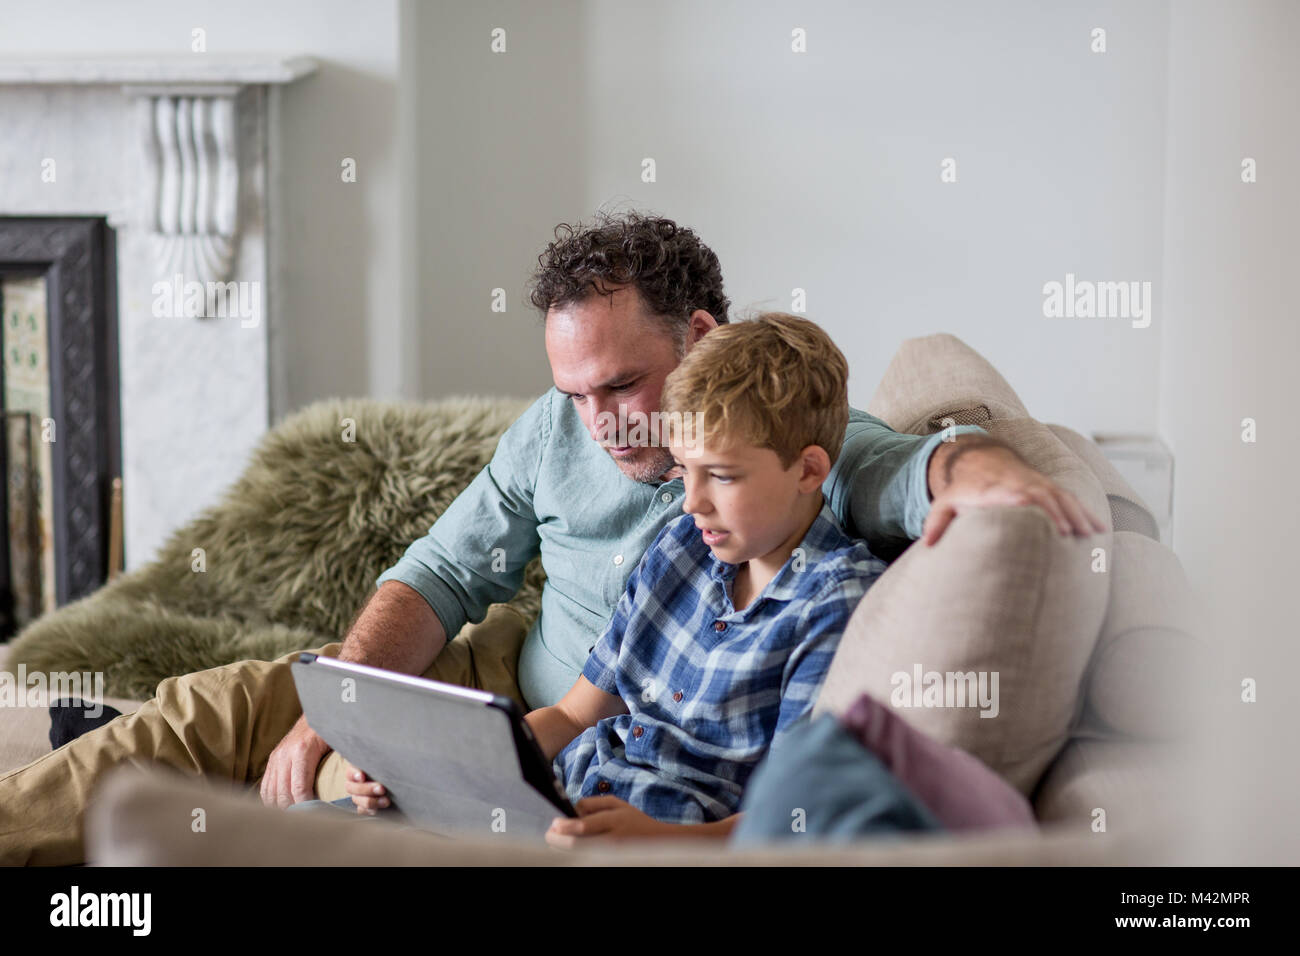 Father and Son looking at a digital tablet Stock Photo